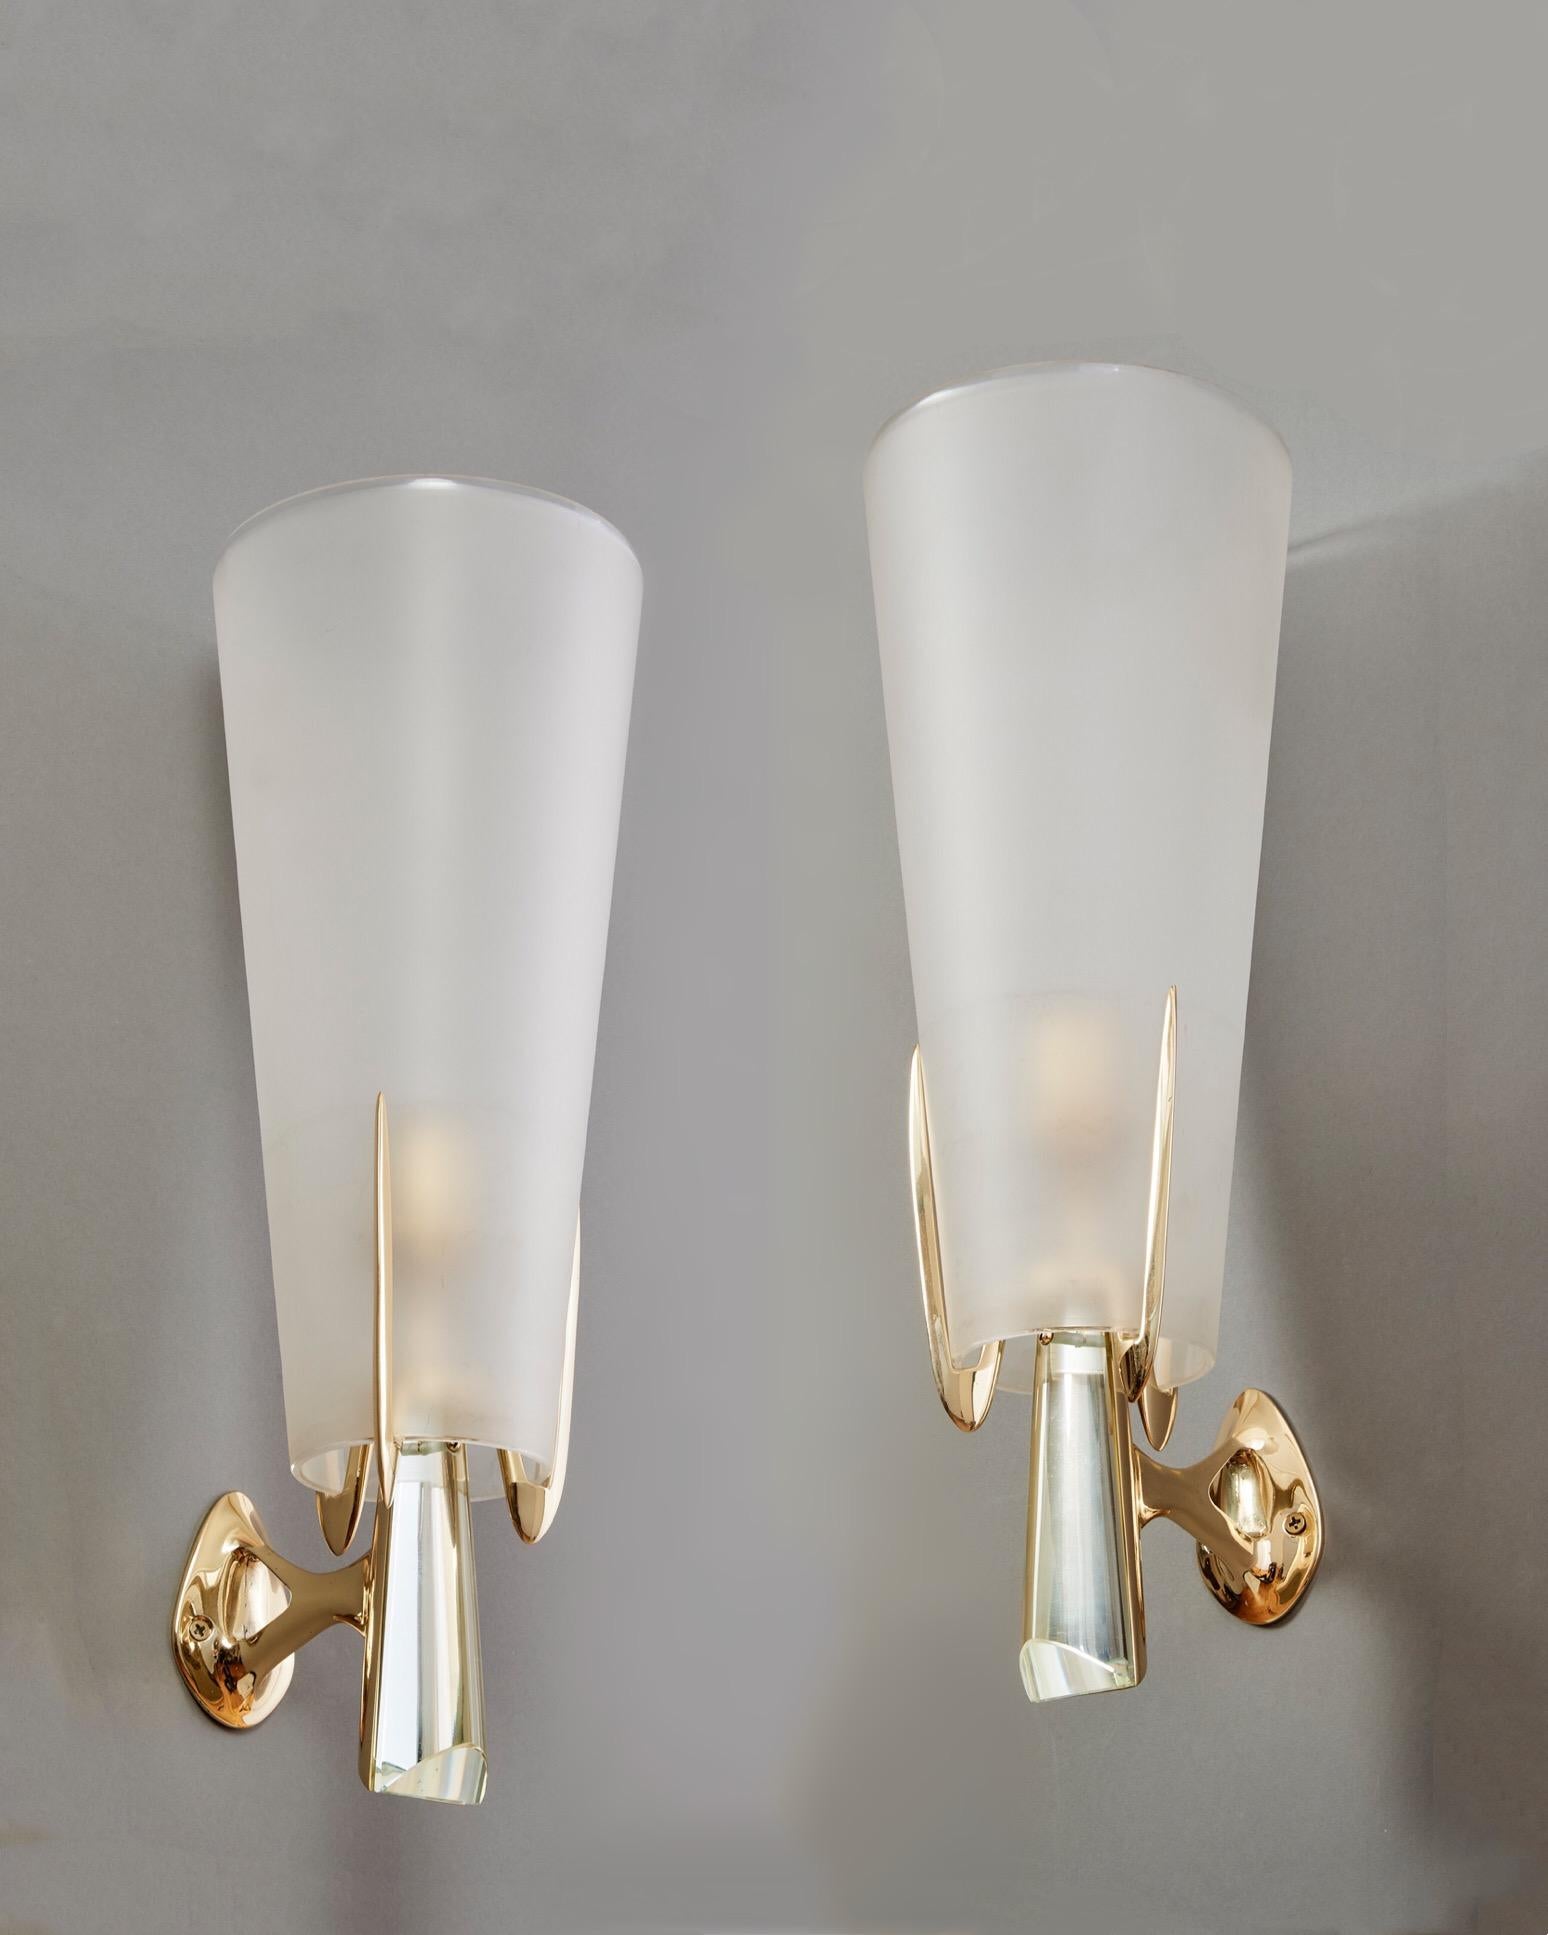 Italian Max Ingrand for Fontana Arte: Rare Sconces in Brass and Crystal, Italy 1955 For Sale